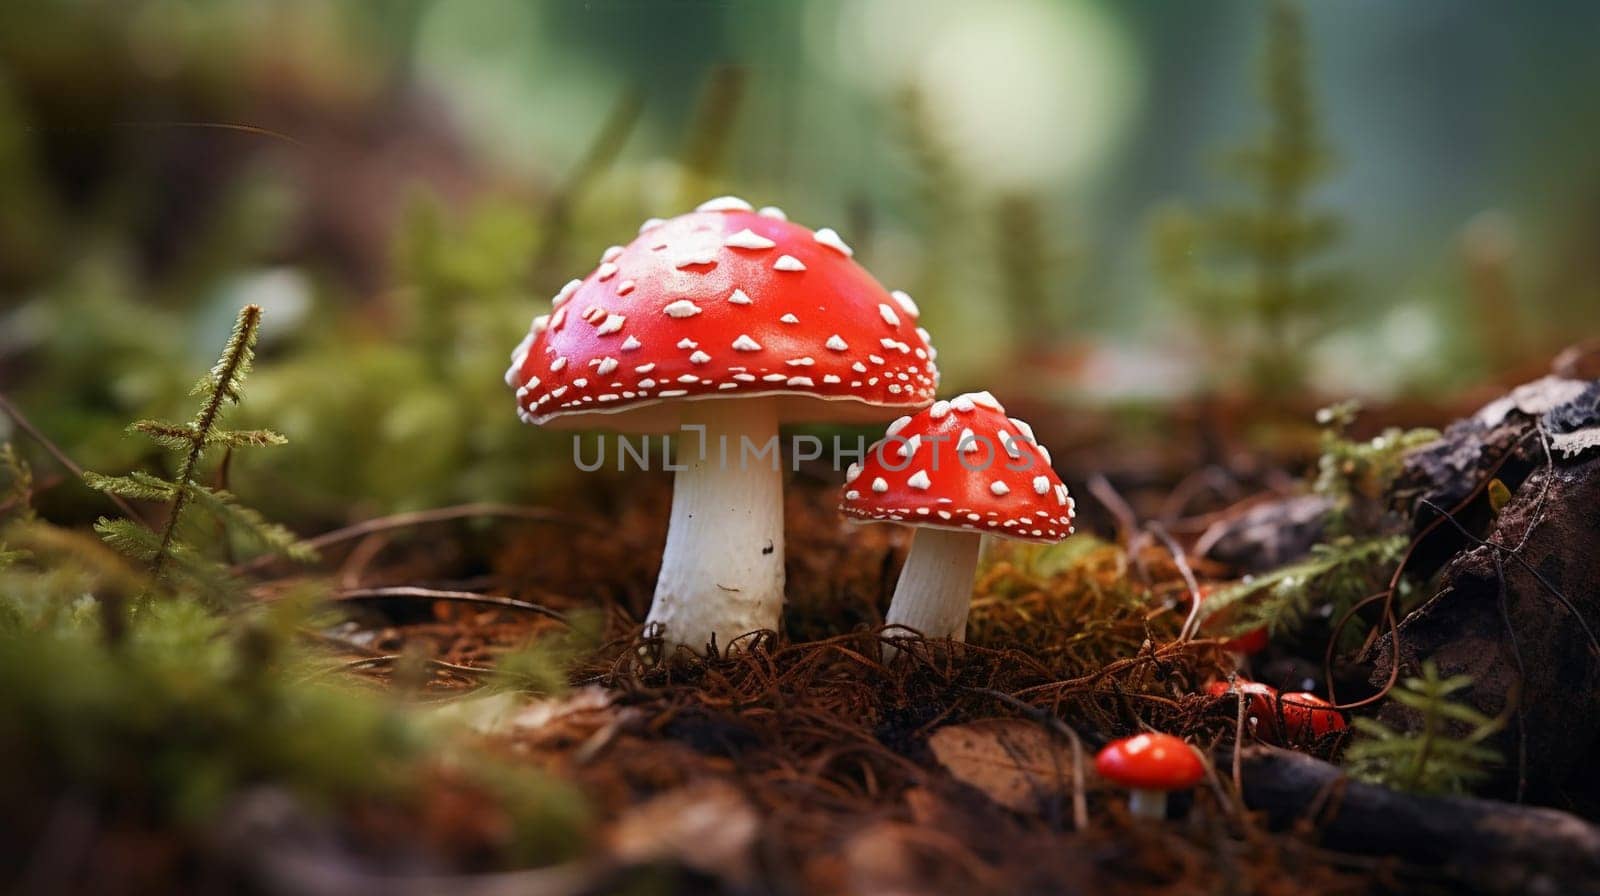 Red and white spotted mushrooms among forest foliage, displaying vivid colors and natural surroundings. High quality photo